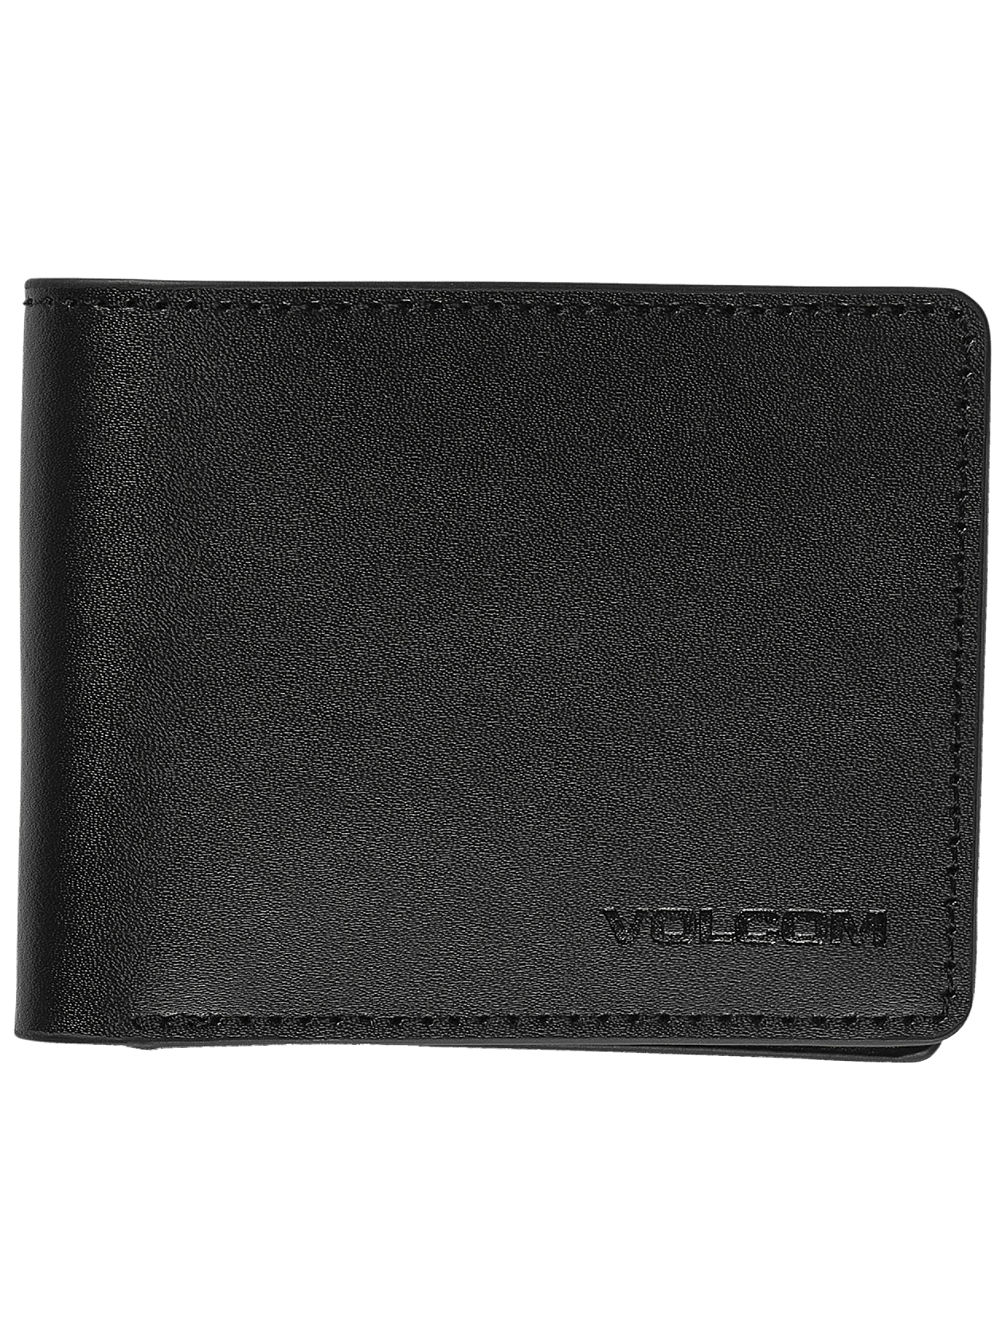 Evers Leather Wallet